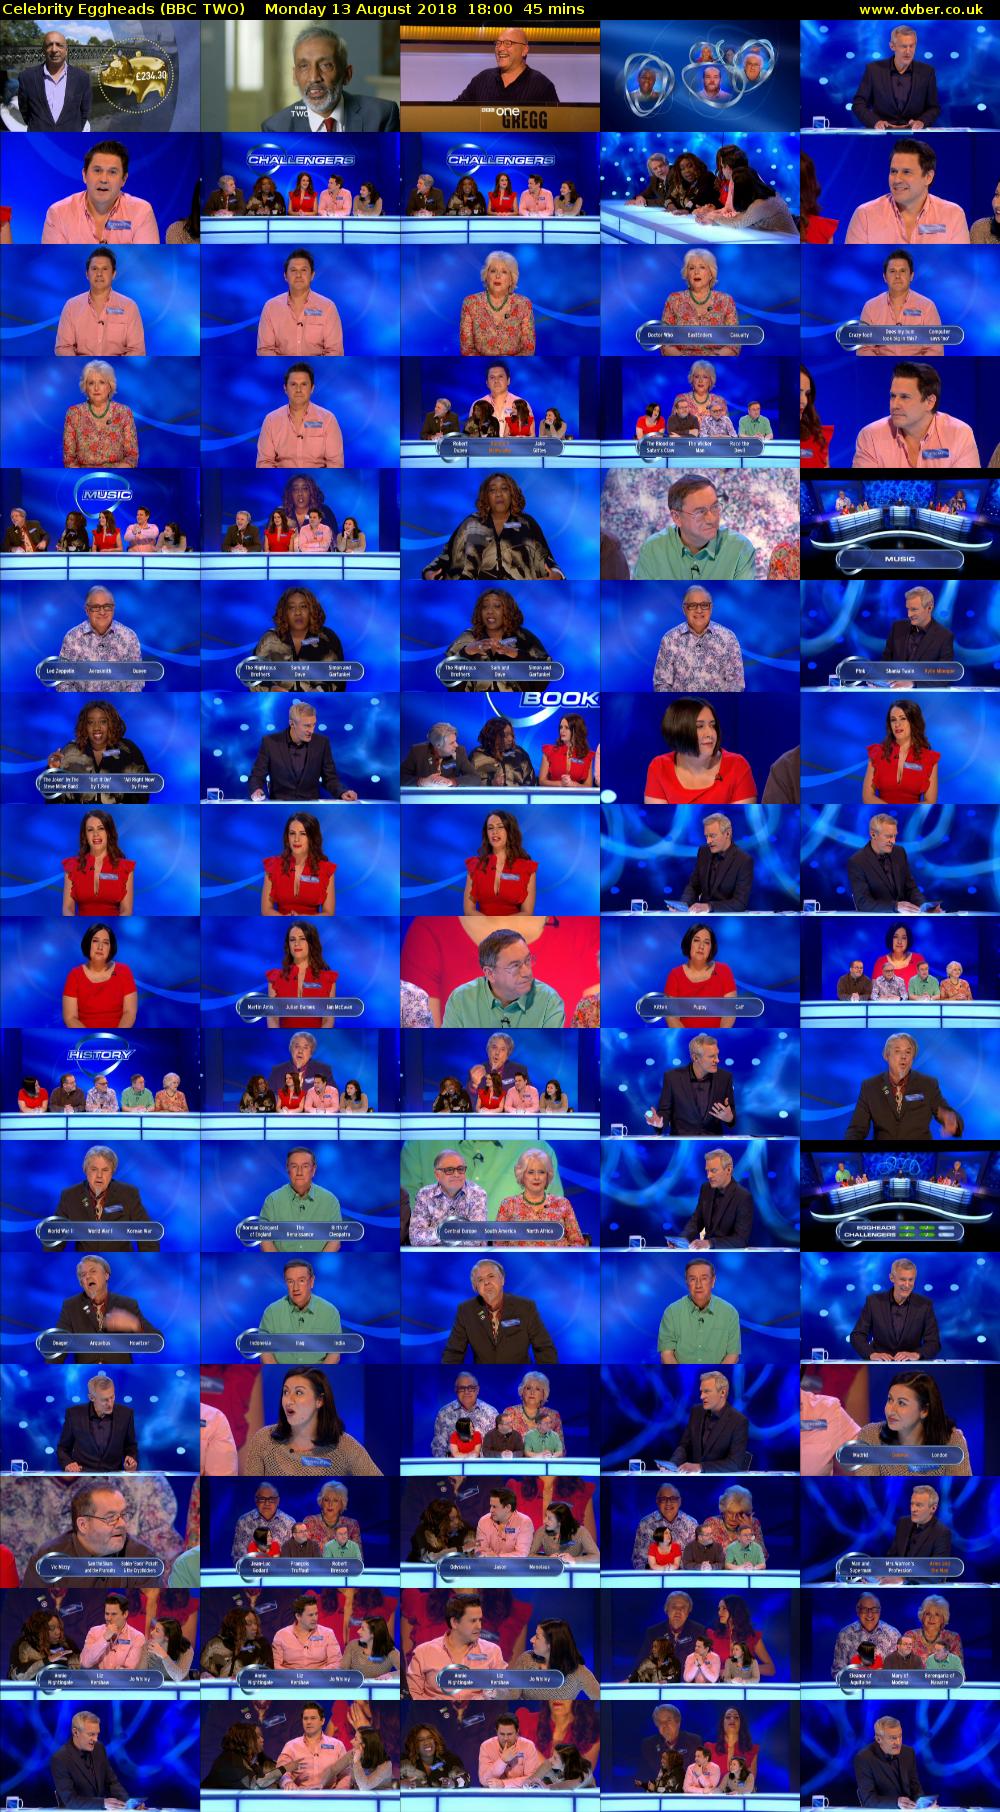 Celebrity Eggheads (BBC TWO) Monday 13 August 2018 18:00 - 18:45